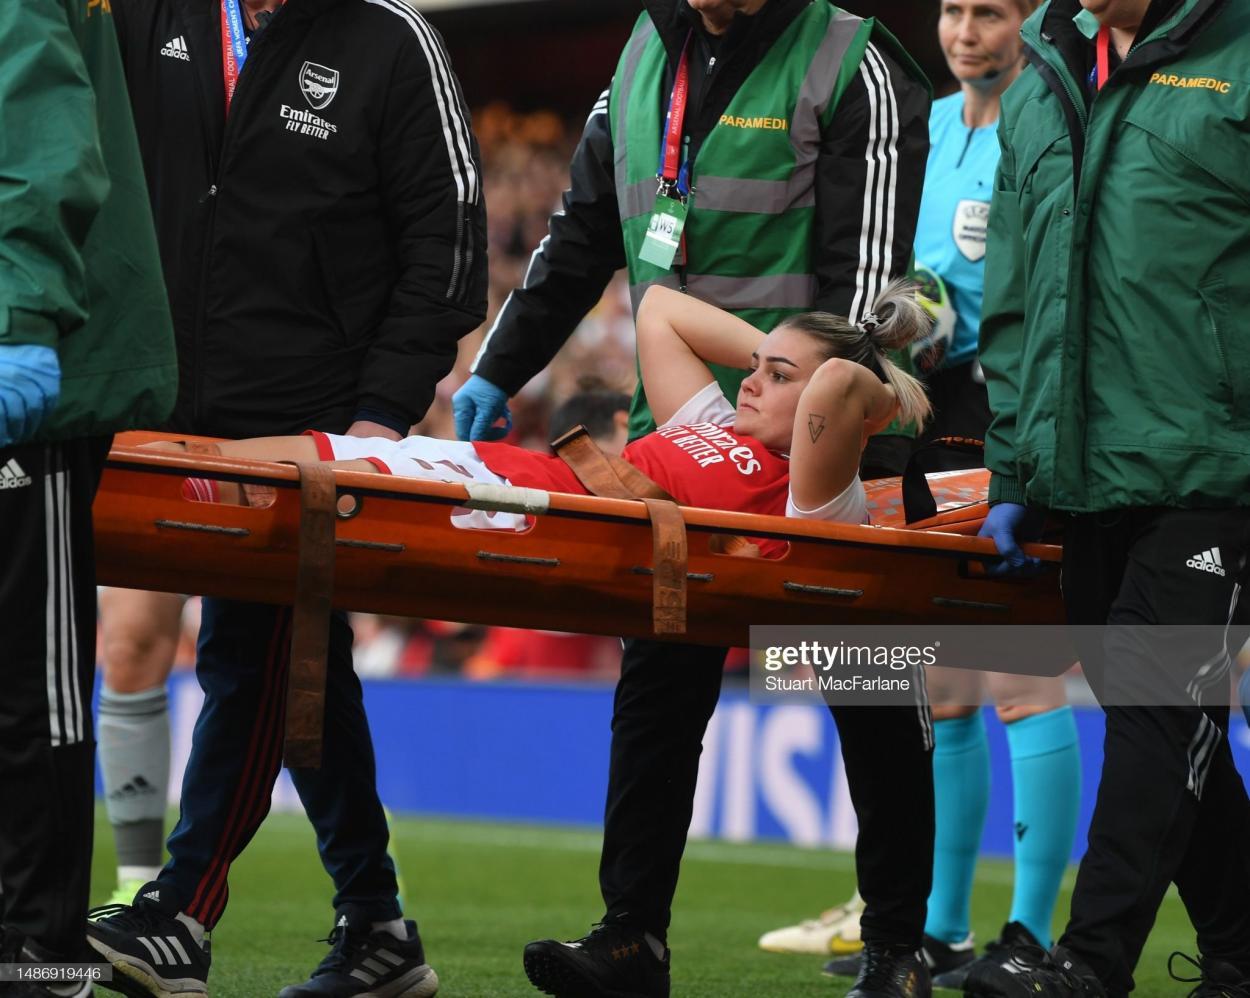 Injured Arsenal attacker Laura Wienroither stretchered off during the UEFA Women's Champions League semifinal 2nd leg match between Arsenal and VfL Wolfsburg at Emirates Stadium on May 01, 2023 in London, England. (Photo by Stuart MacFarlane/Arsenal FC via Getty Images)